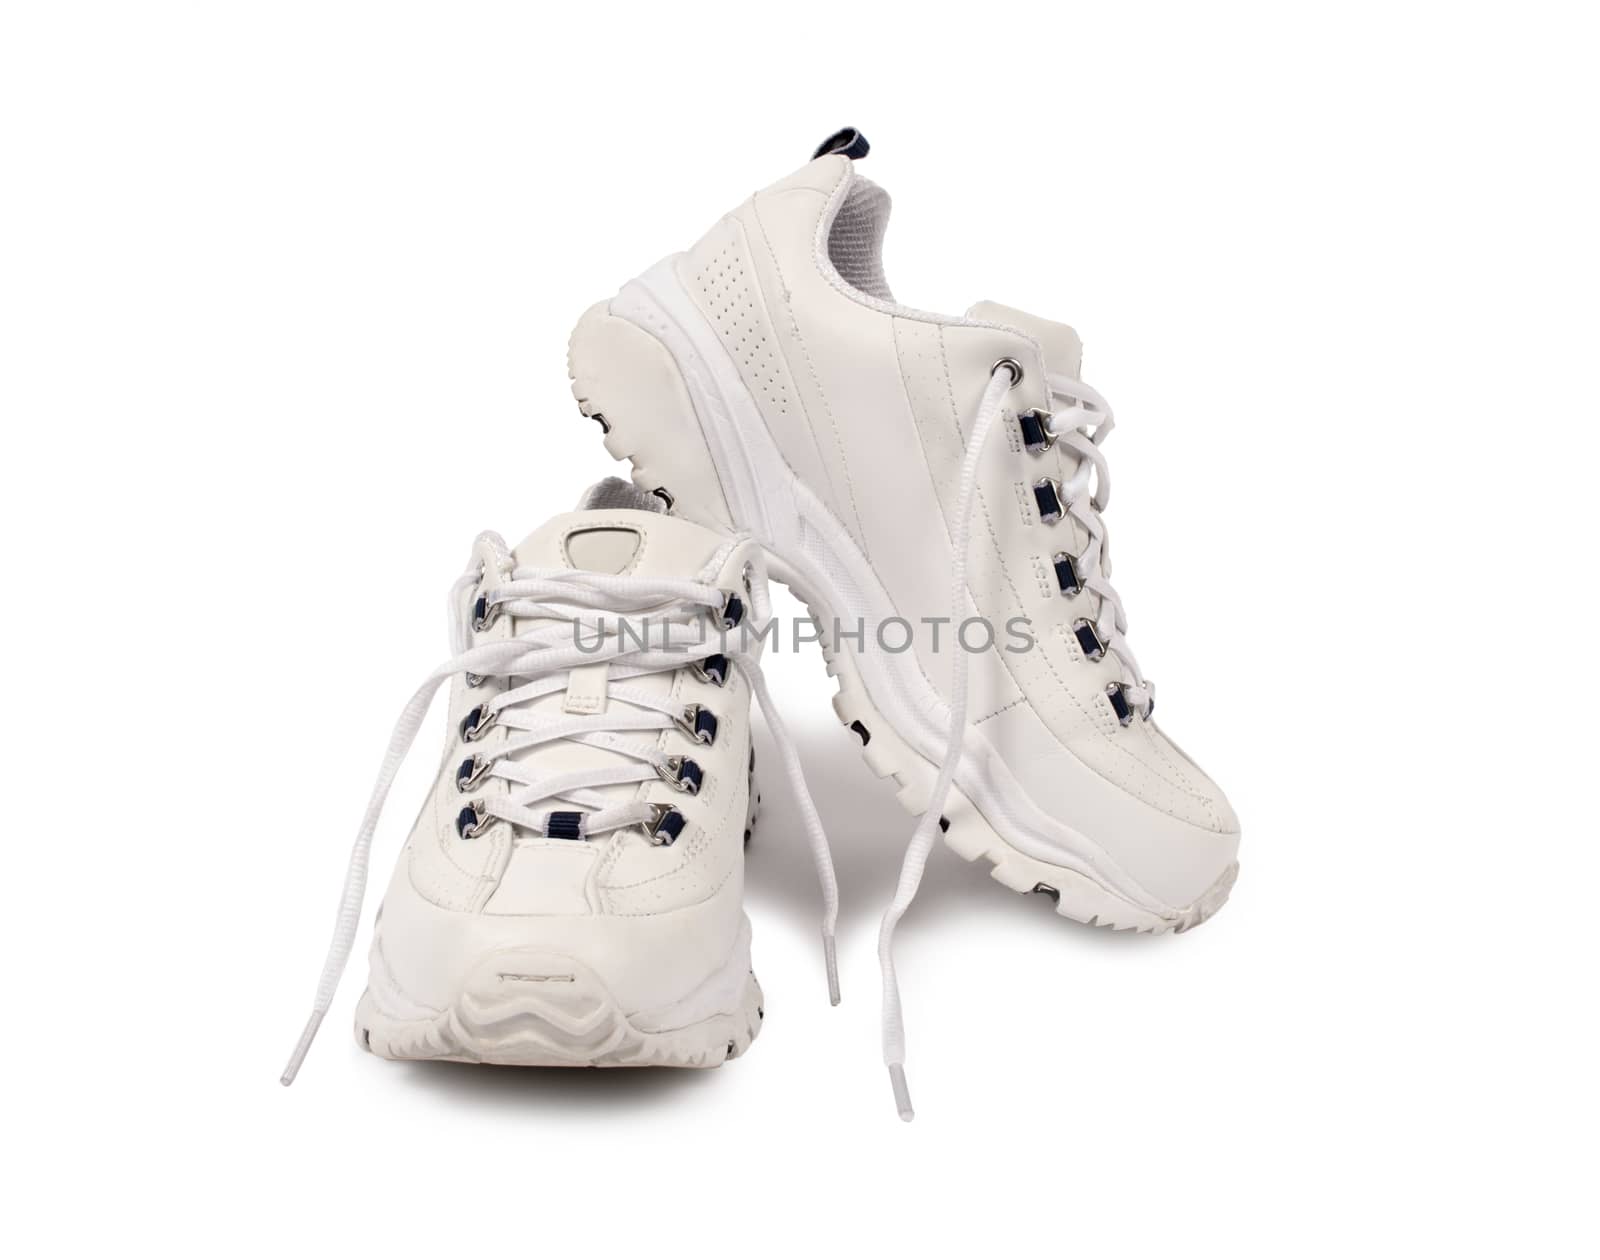 Sport Running Shoes Isolated by stockbuster1